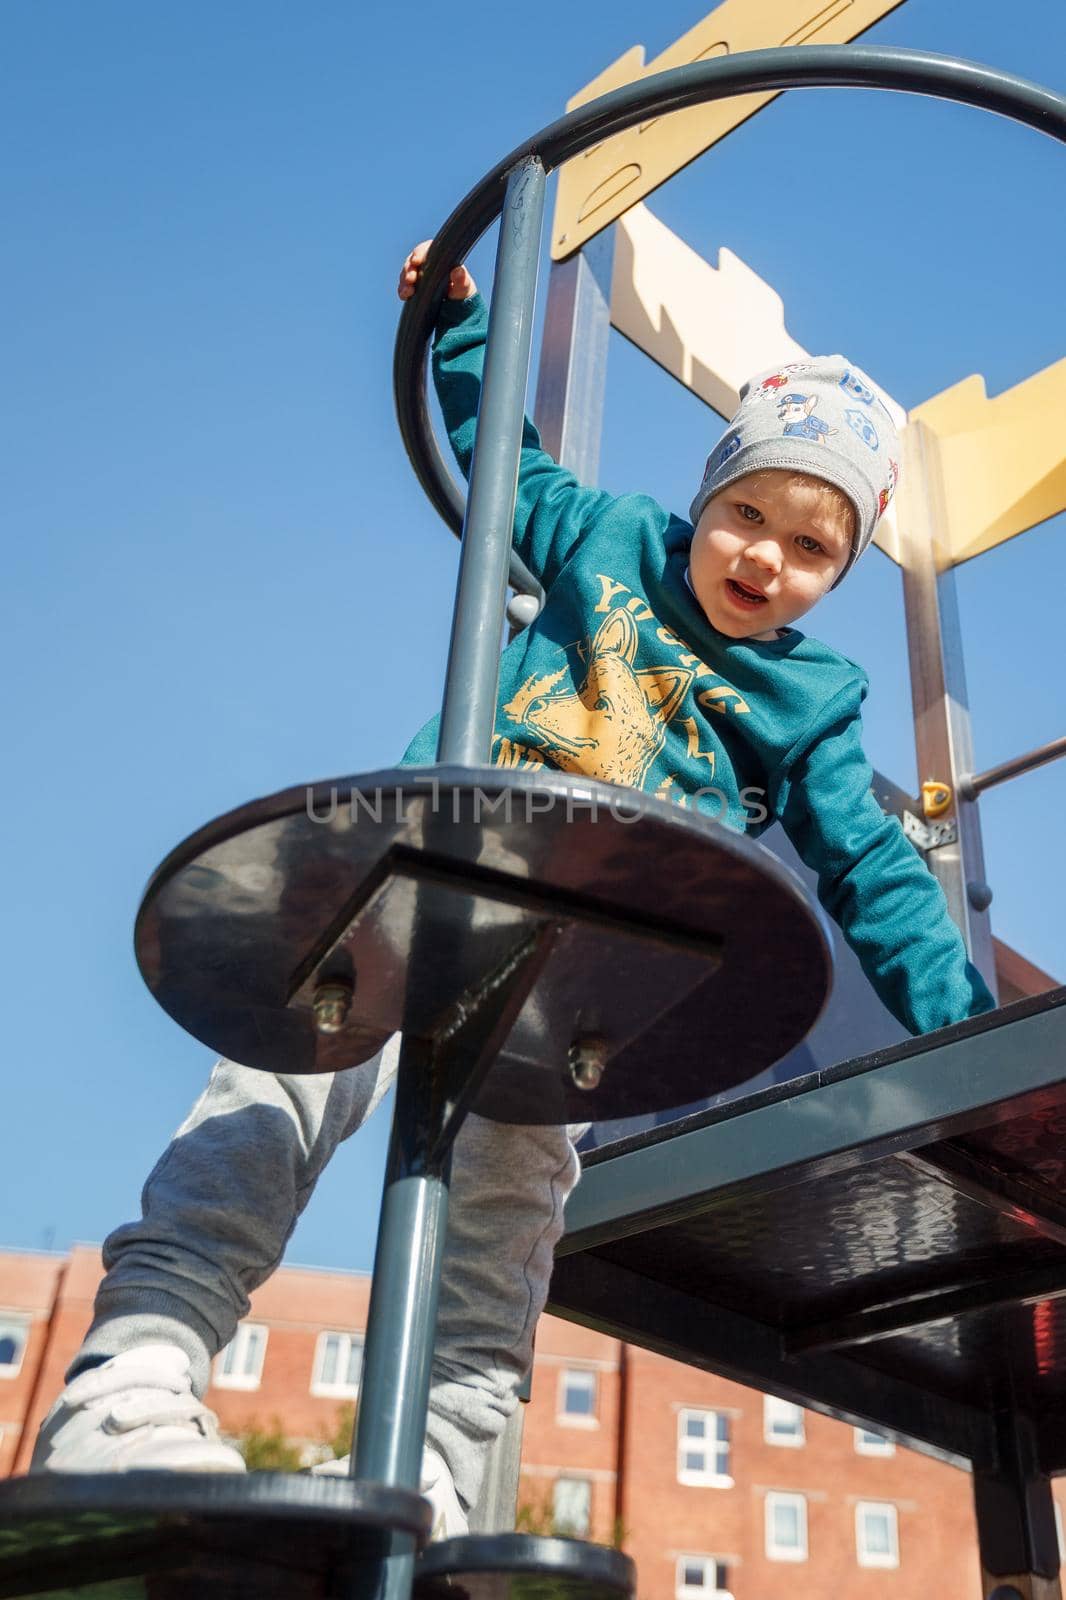 A careful little boy climbs up the playground equipment, view from below, against a background of blue sky.